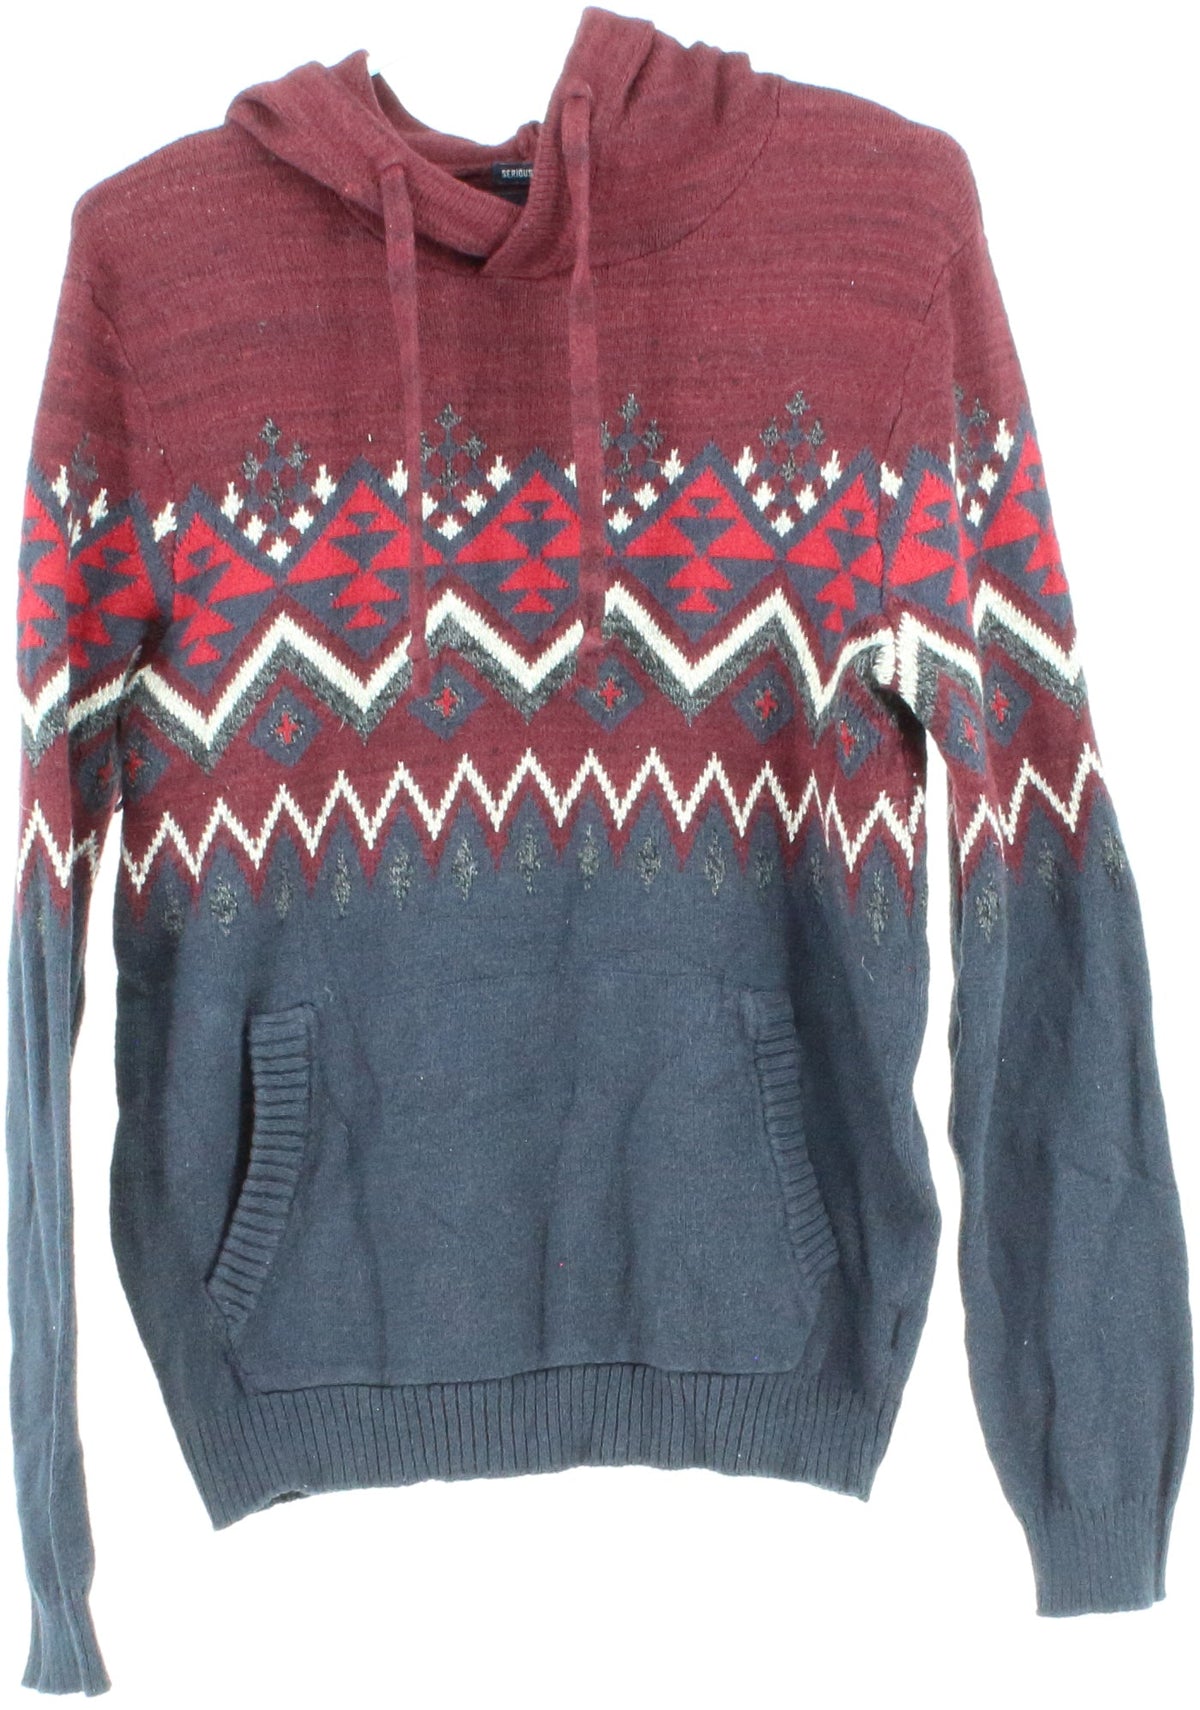 American Eagle Outfitters Burgundy and Navy Blue Graphic Hooded Men's Sweater